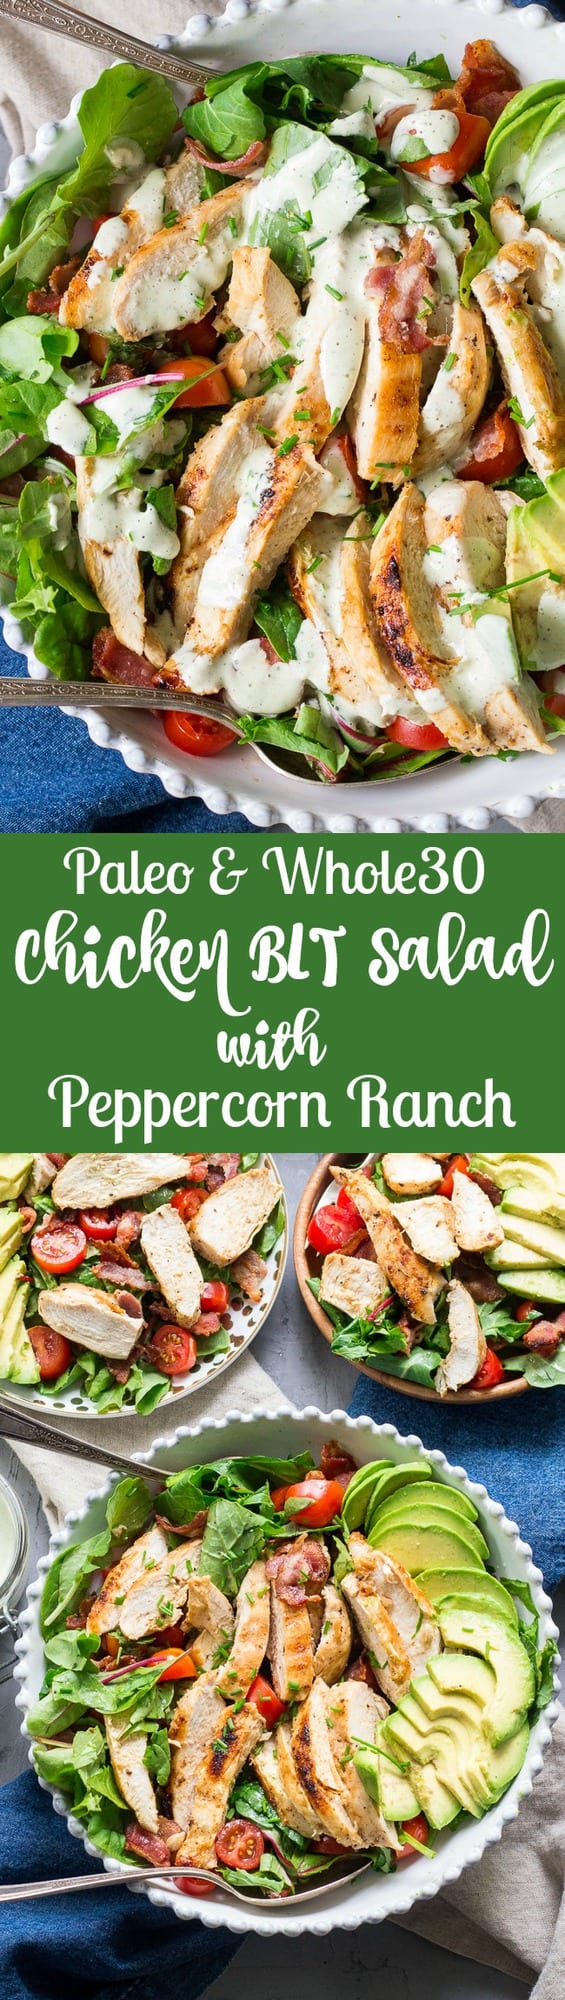 This grilled chicken BLT salad includes all your favorites - crispy bacon, perfectly seasoned grilled chicken, cherry tomatoes, and avocado! It's topped with a healthy paleo & Whole30 friendly peppercorn ranch that might just become your new favorite salad dressing! Dairy-free, gluten-free, even kid approved!